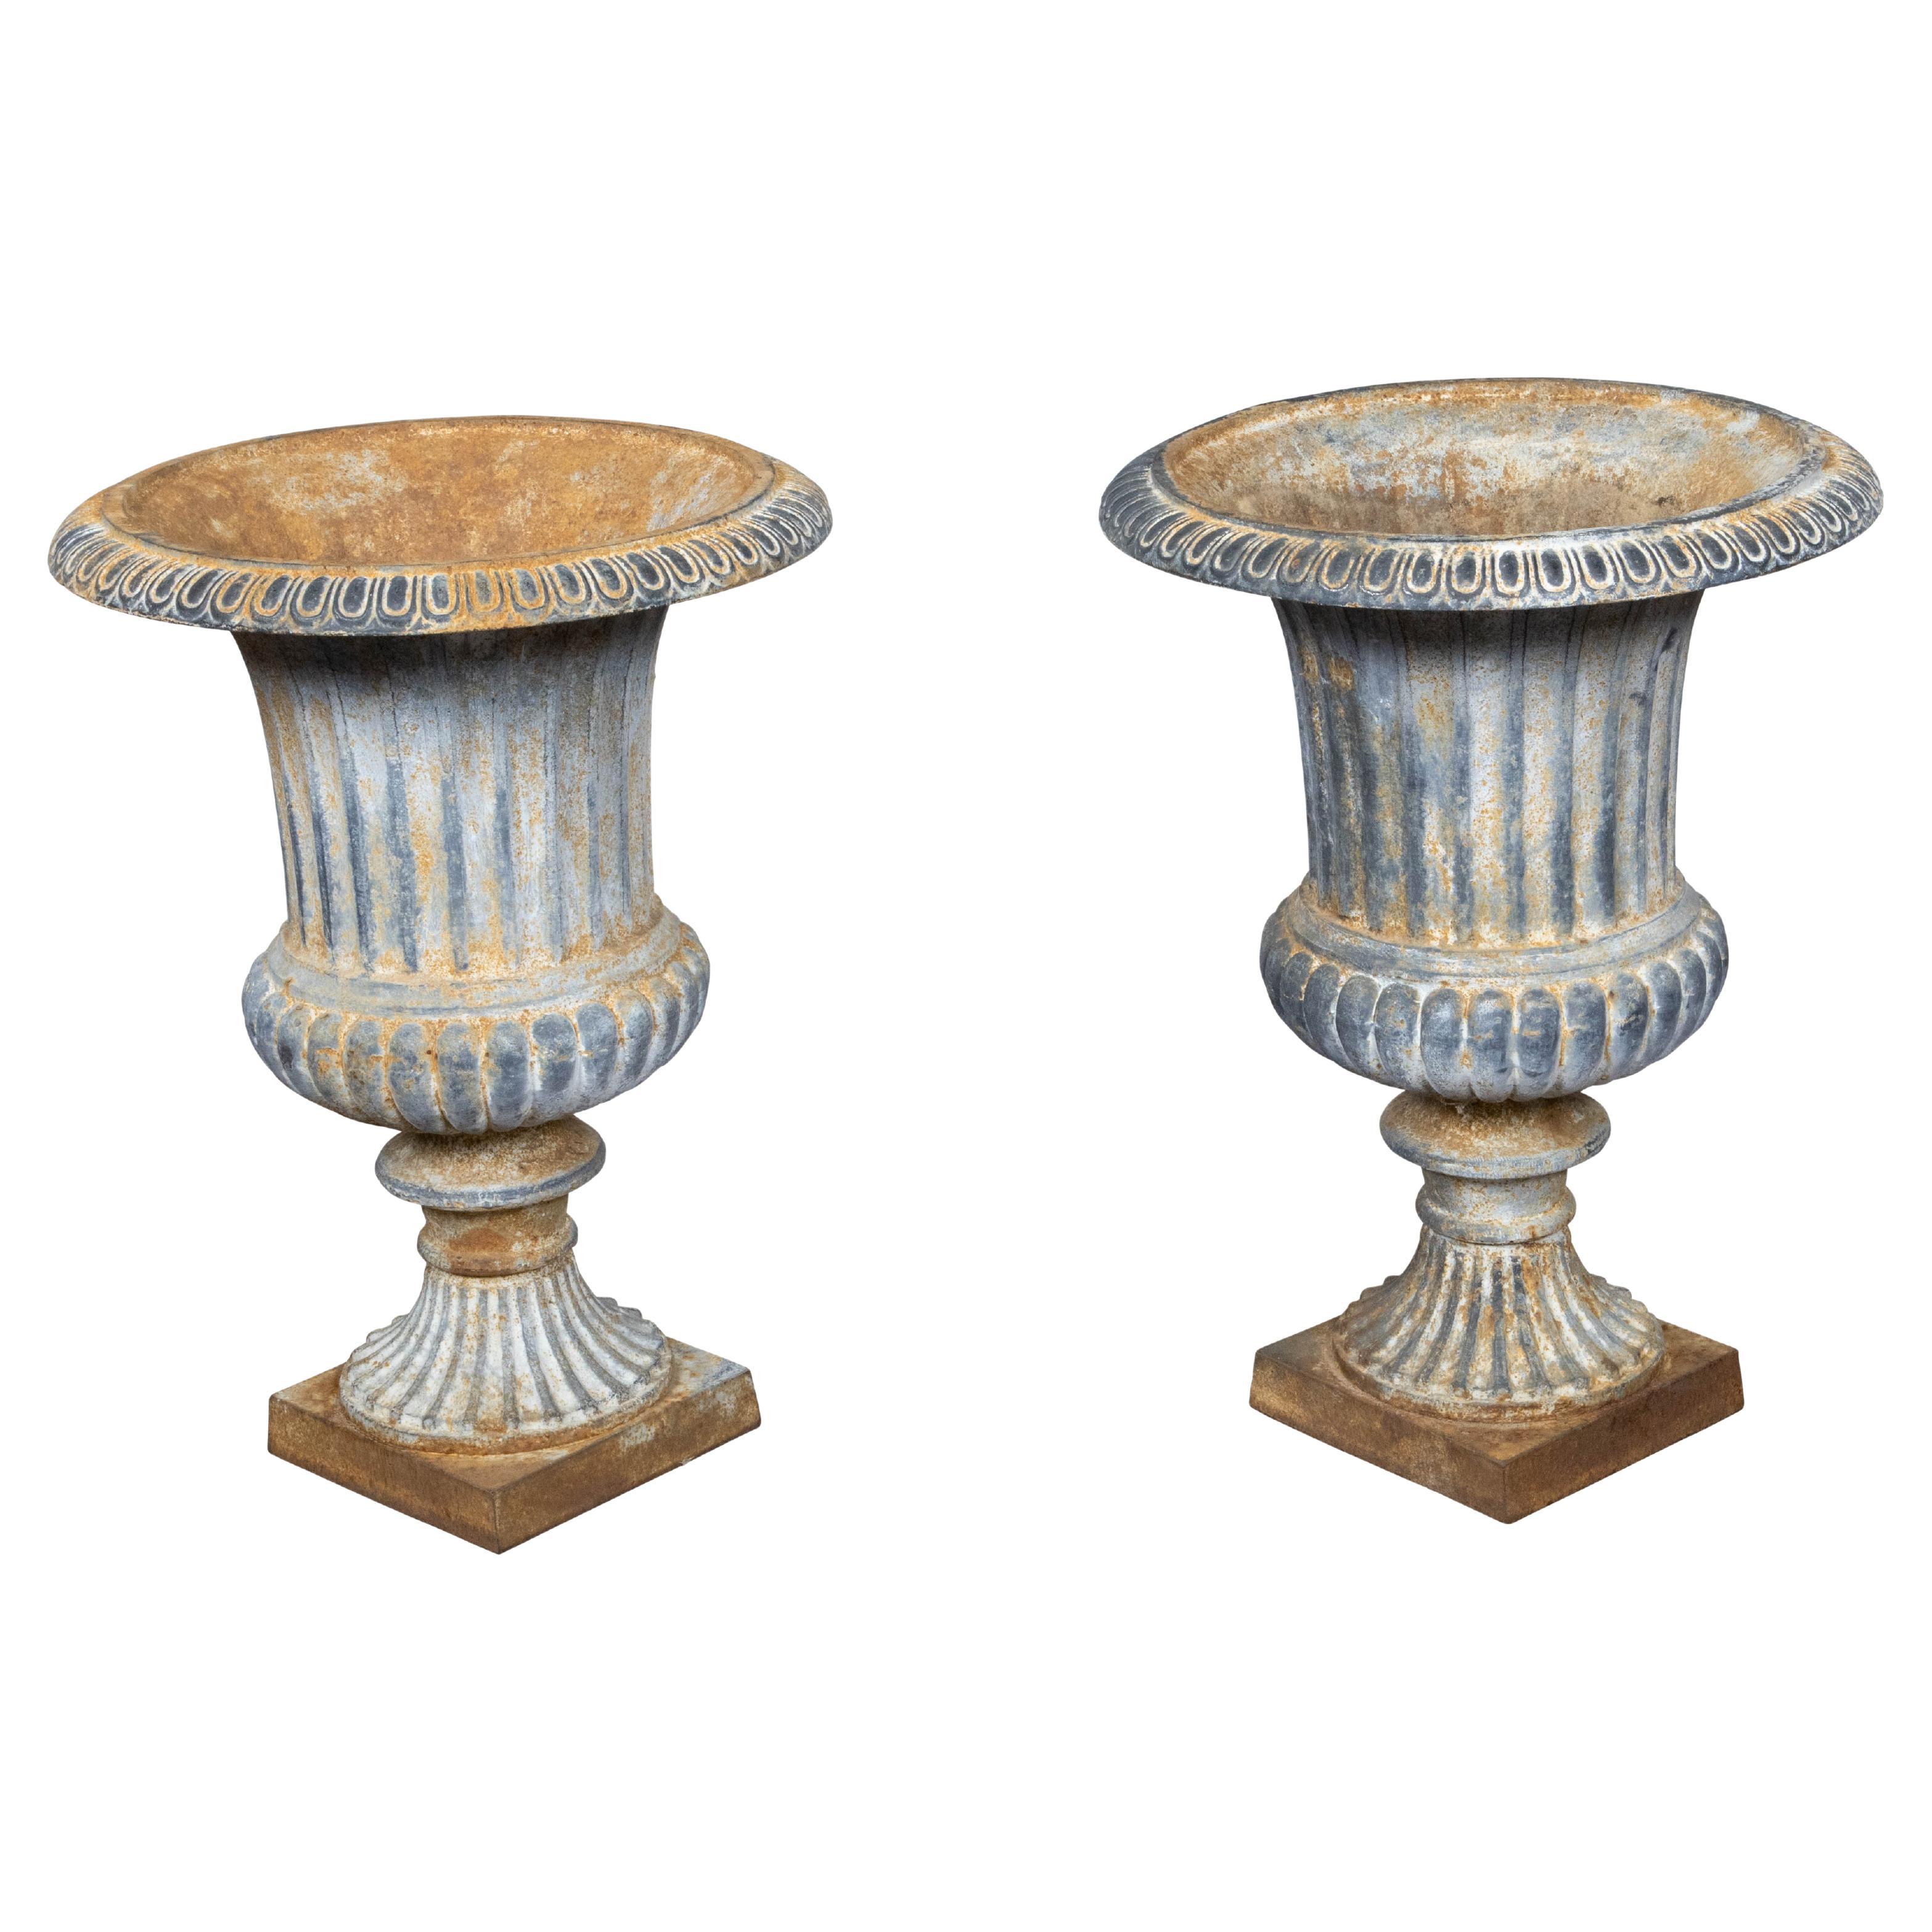 Pair of Turn of the Century French Medici Urn Cast Iron Planters with Patina